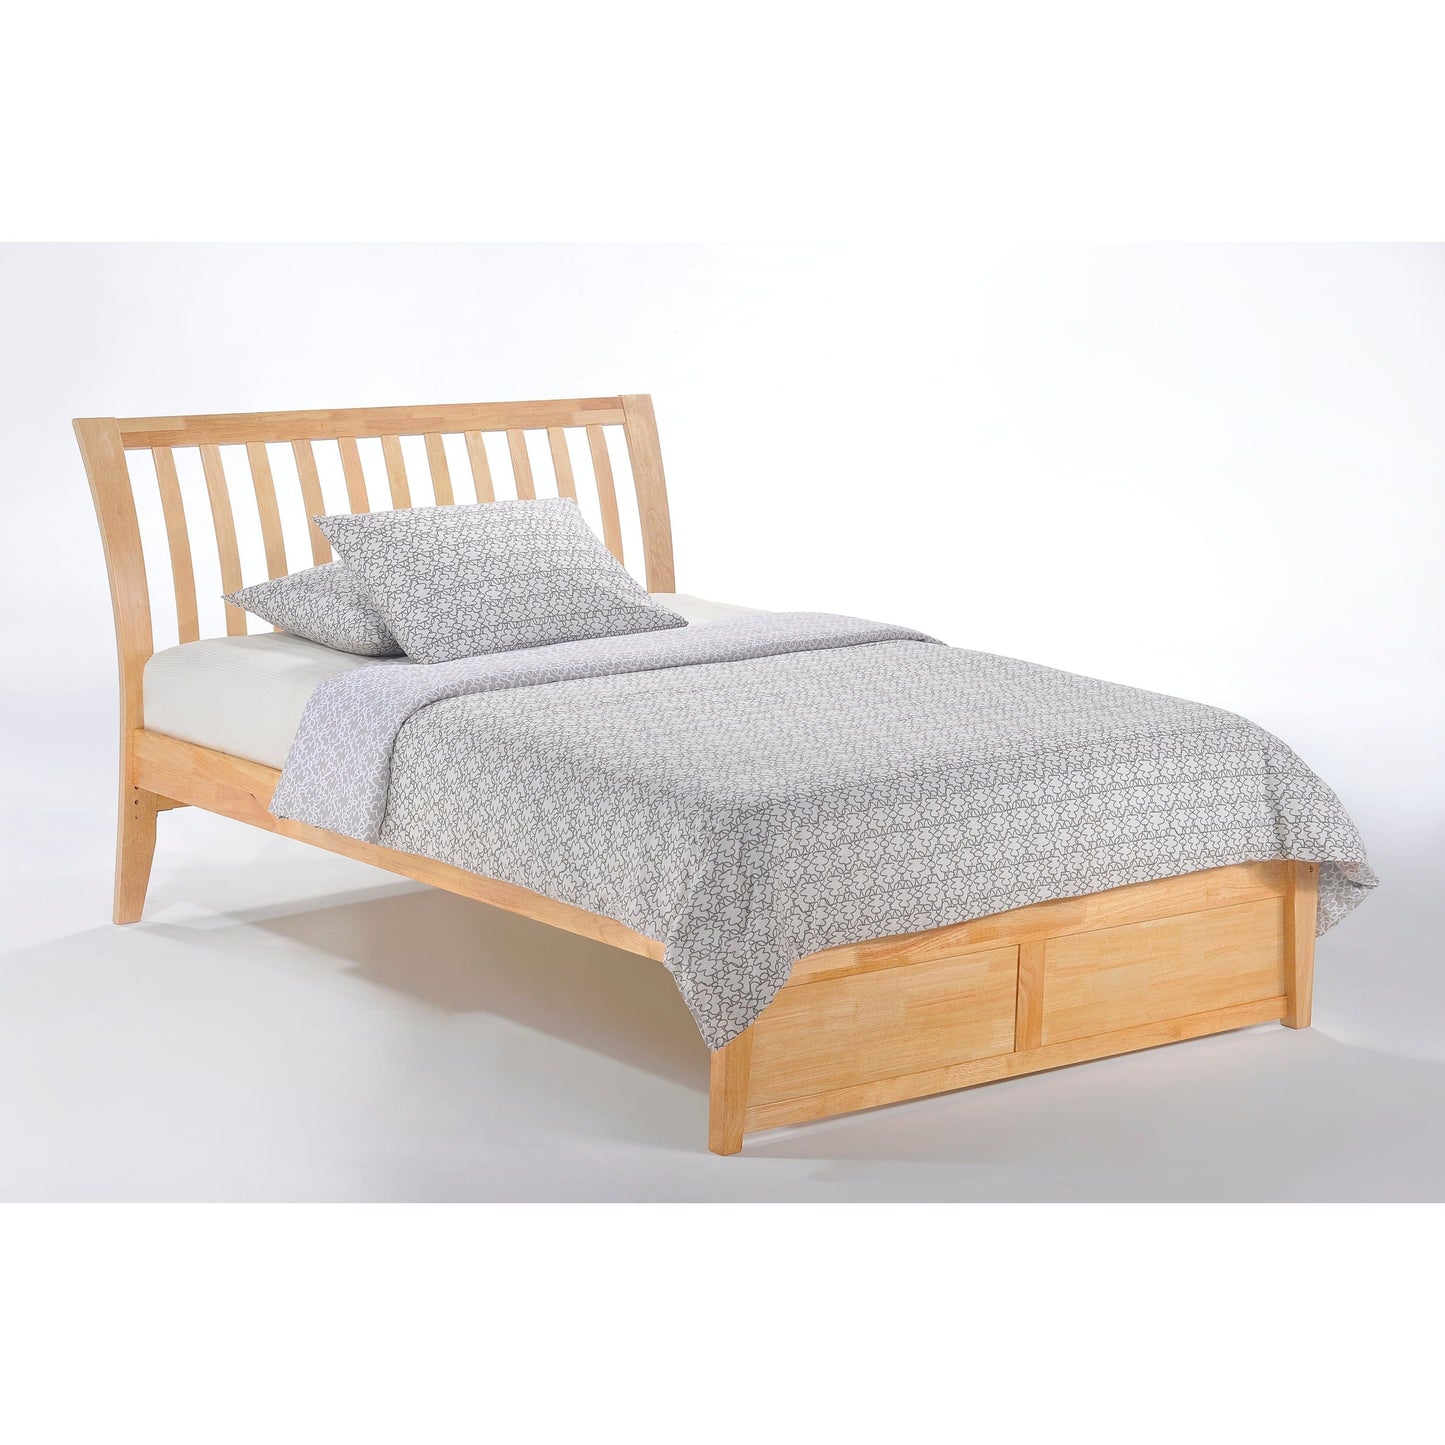 The Bedroom Emporium Twin K Series Nutmeg Bed in cherry finish Natural NUT-PH-TWN-COM-K-CH-3